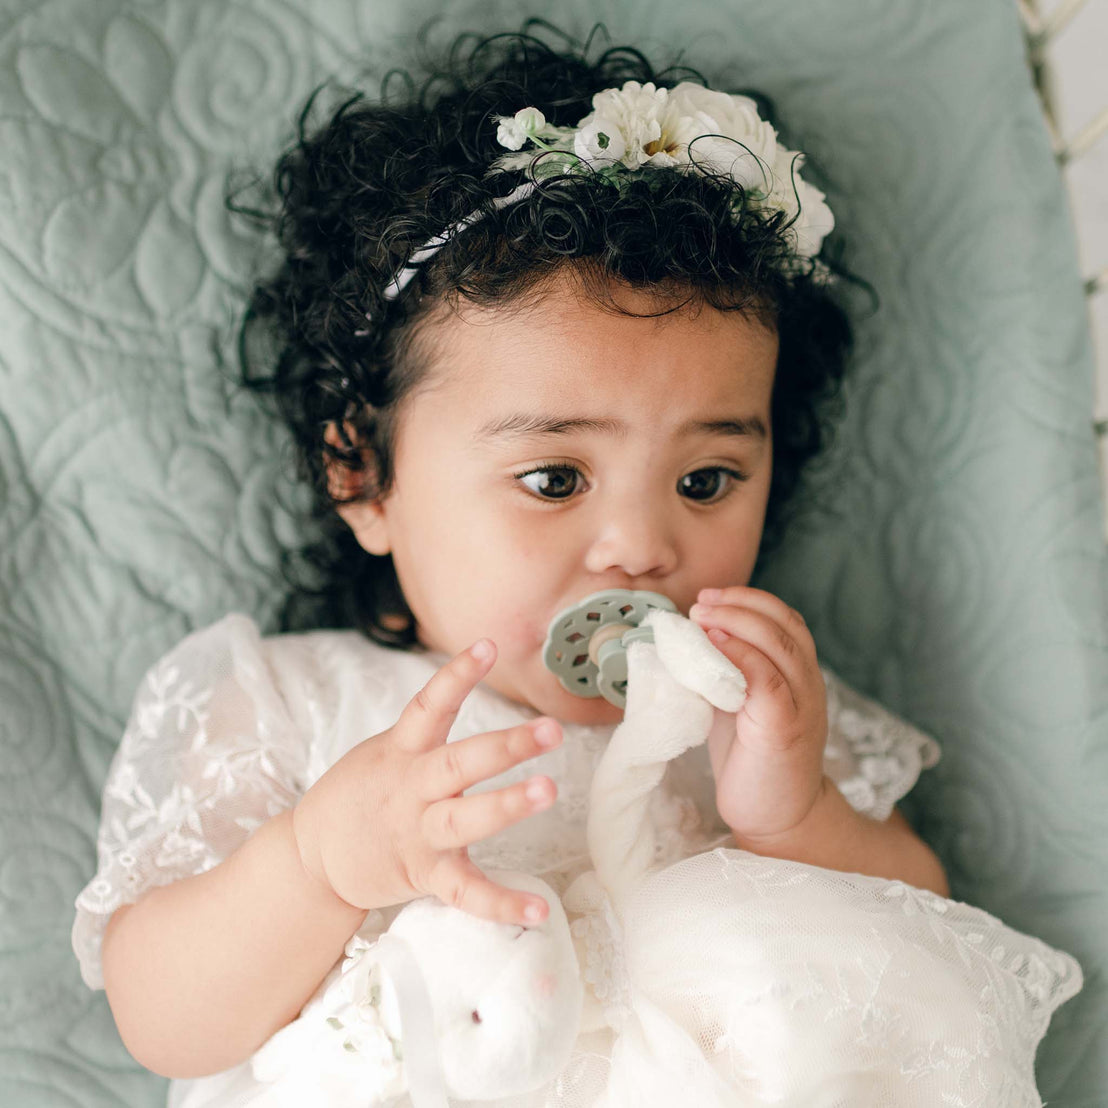 A baby with curly hair and wearing the Ella Flower Headband lies on a quilted surface. The baby holds an Ella Pacifier in sage and an Ella Silly Bunny Buddy, appearing engaged and curious.